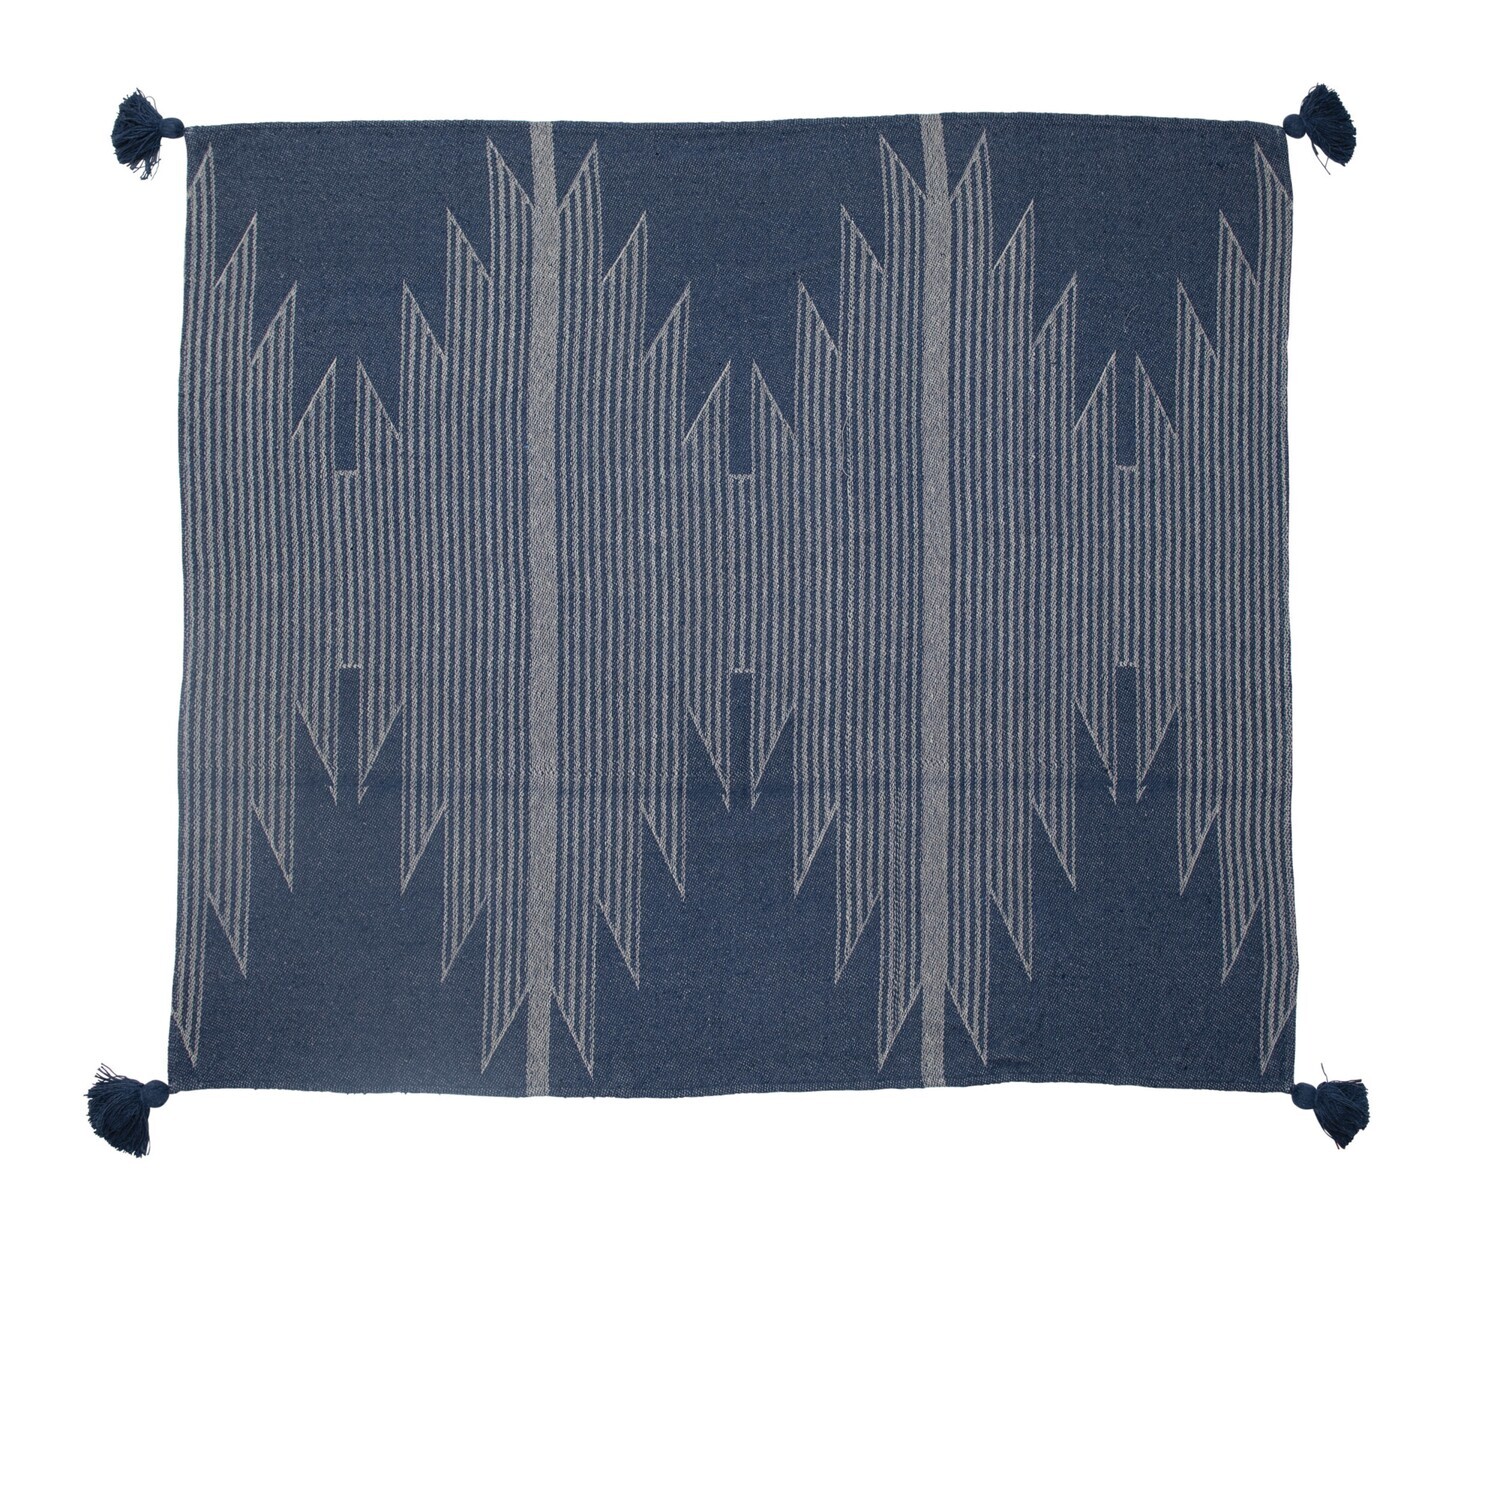 Blue Aztec Patterned Throw